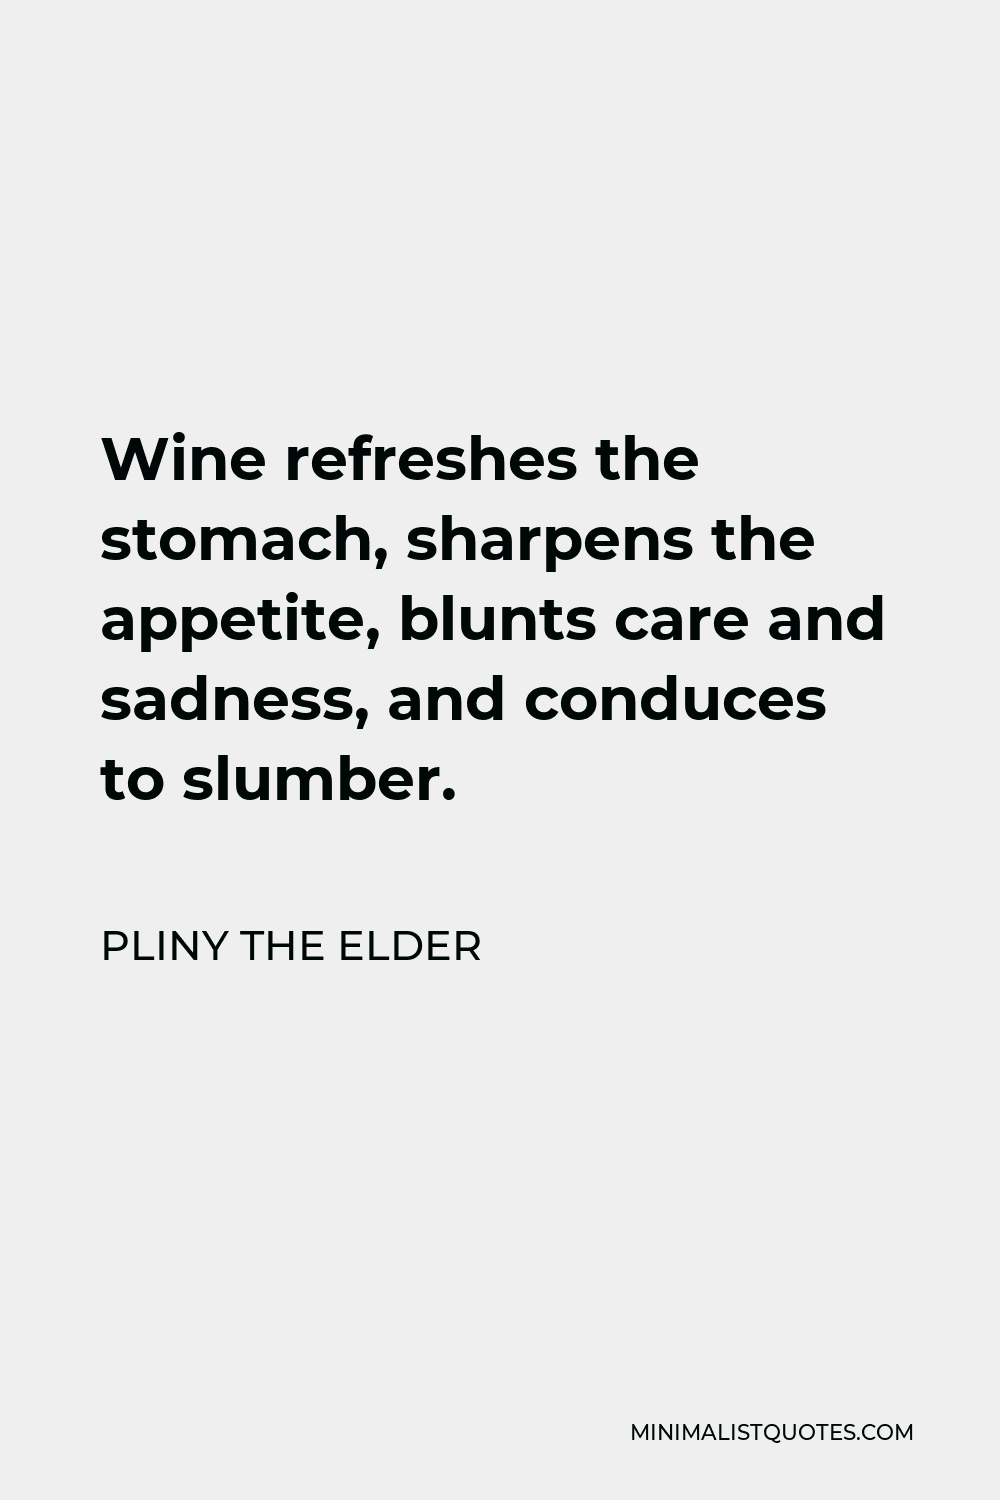 Pliny the Elder Quote - Wine refreshes the stomach, sharpens the appetite, blunts care and sadness, and conduces to slumber.